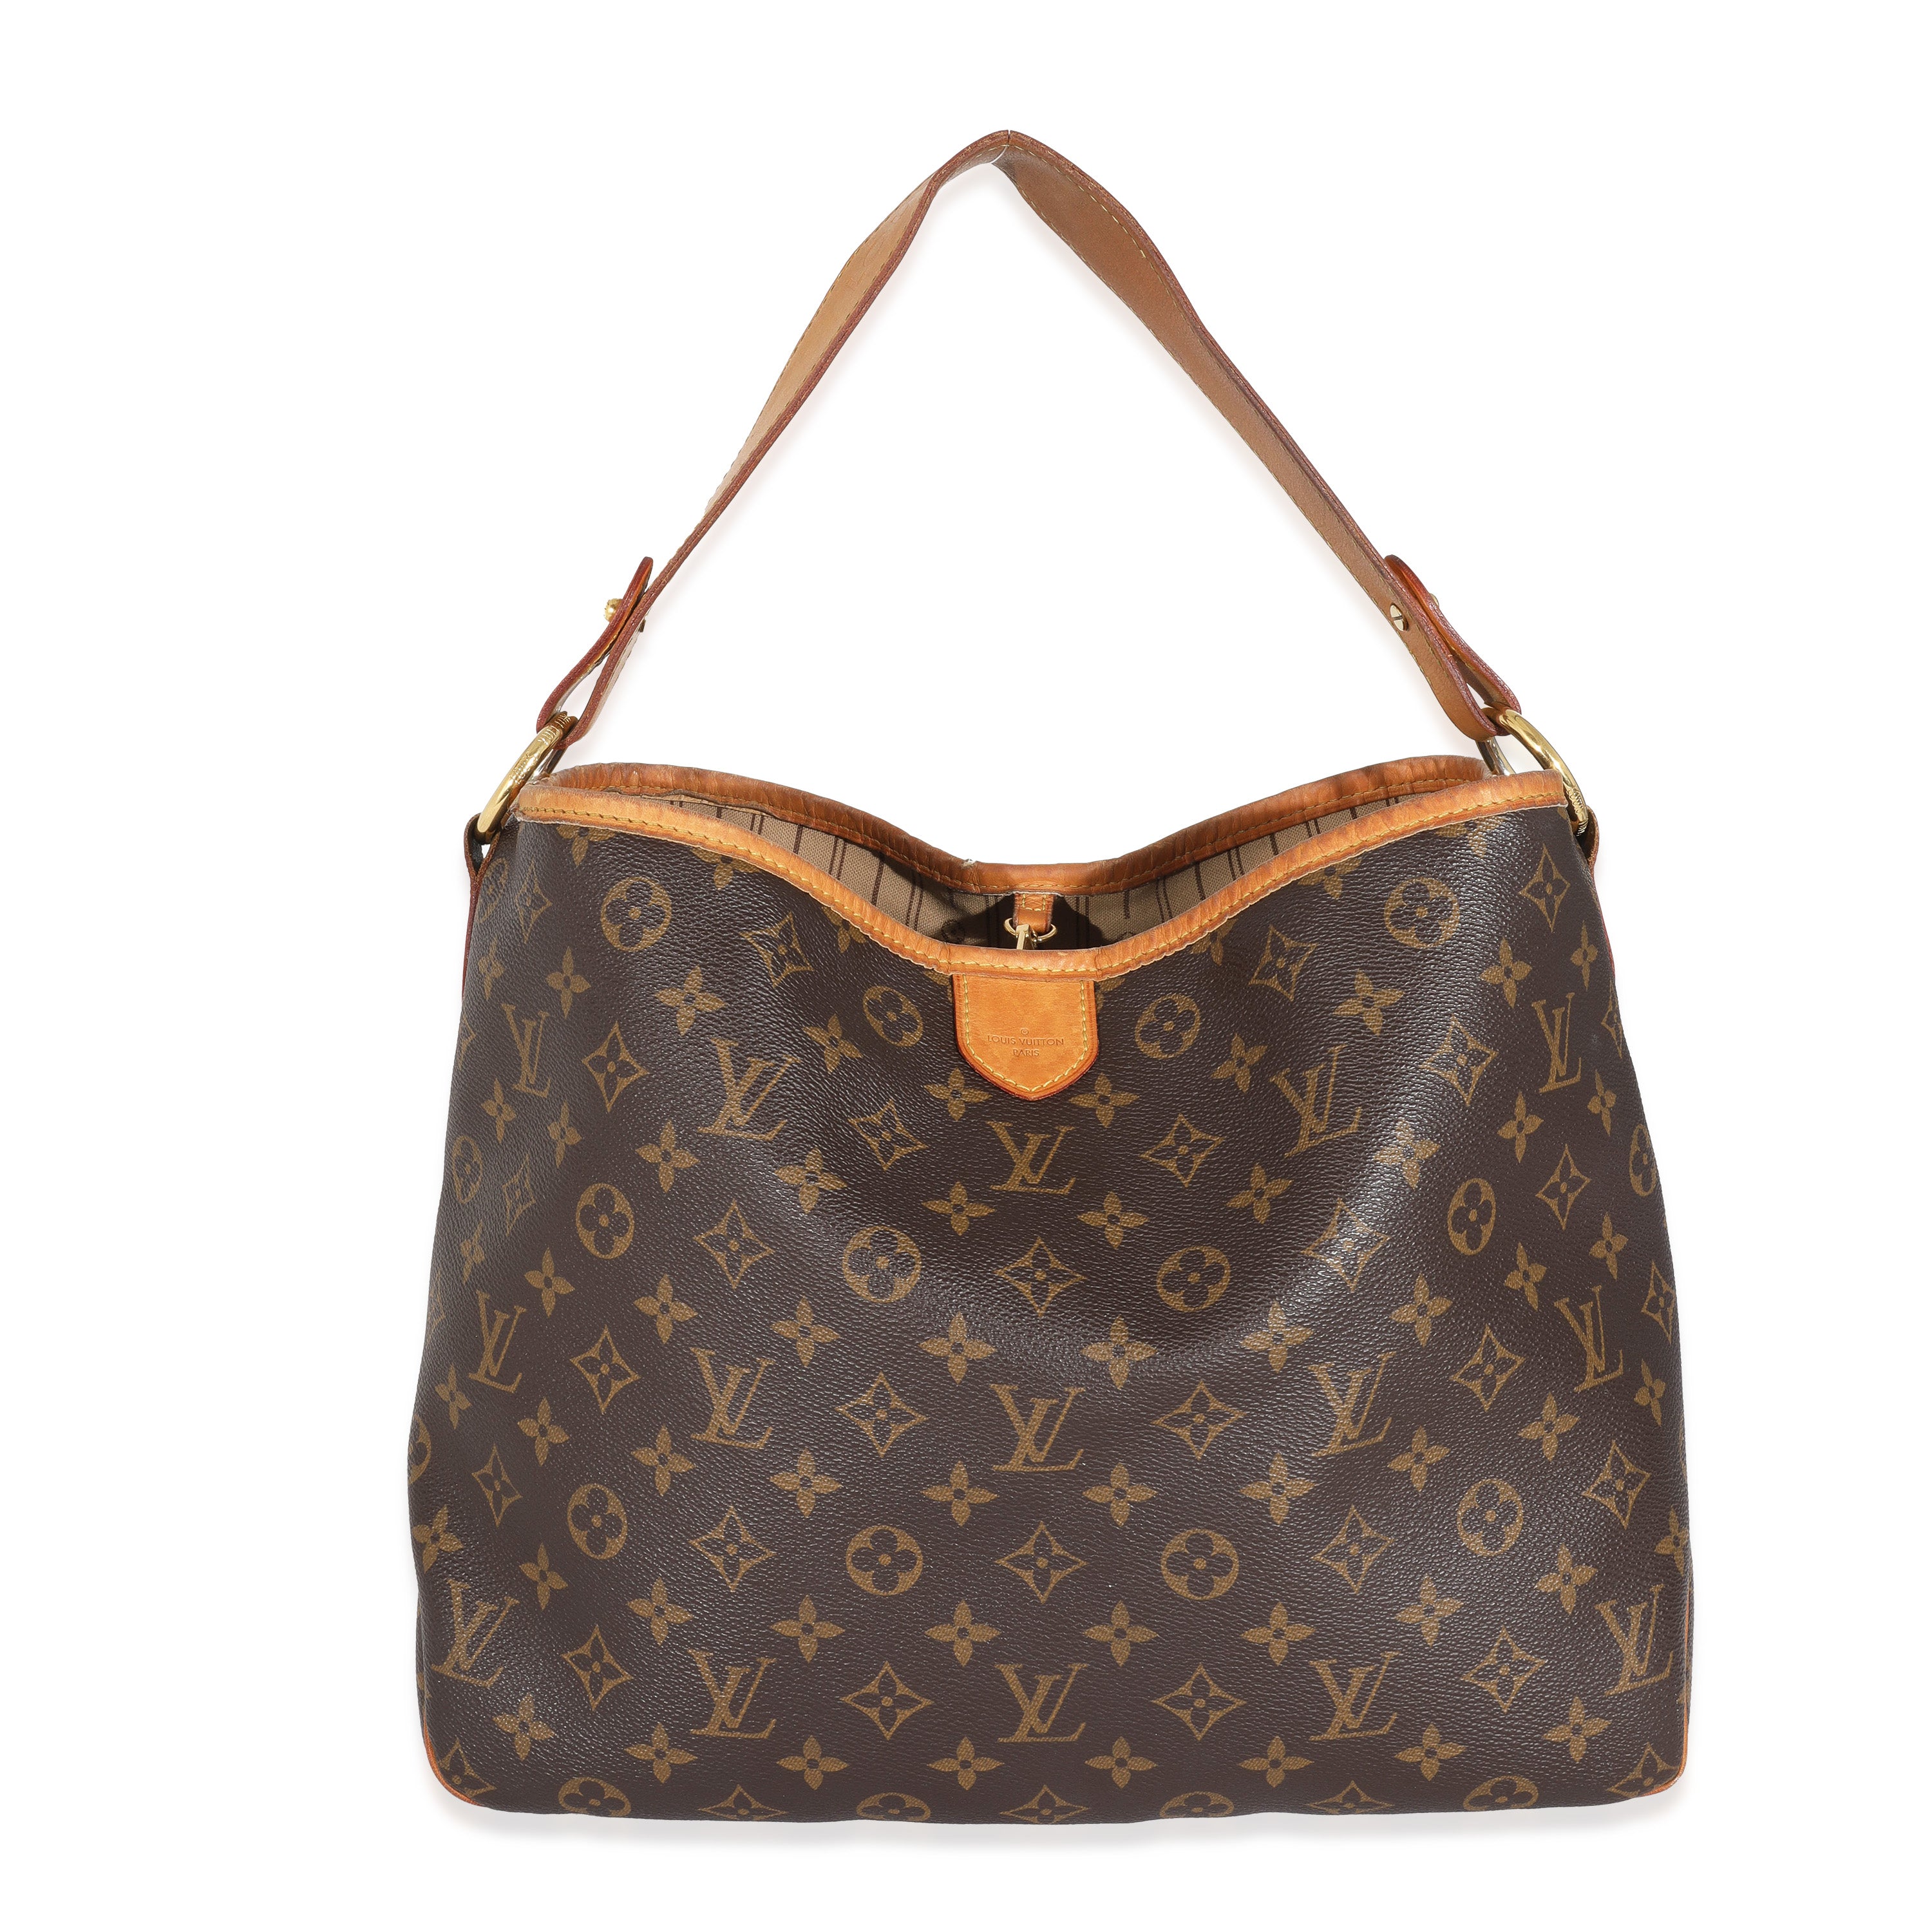 Louis Vuitton Light Pink And Yellow Gradient Giant Monogram Coated